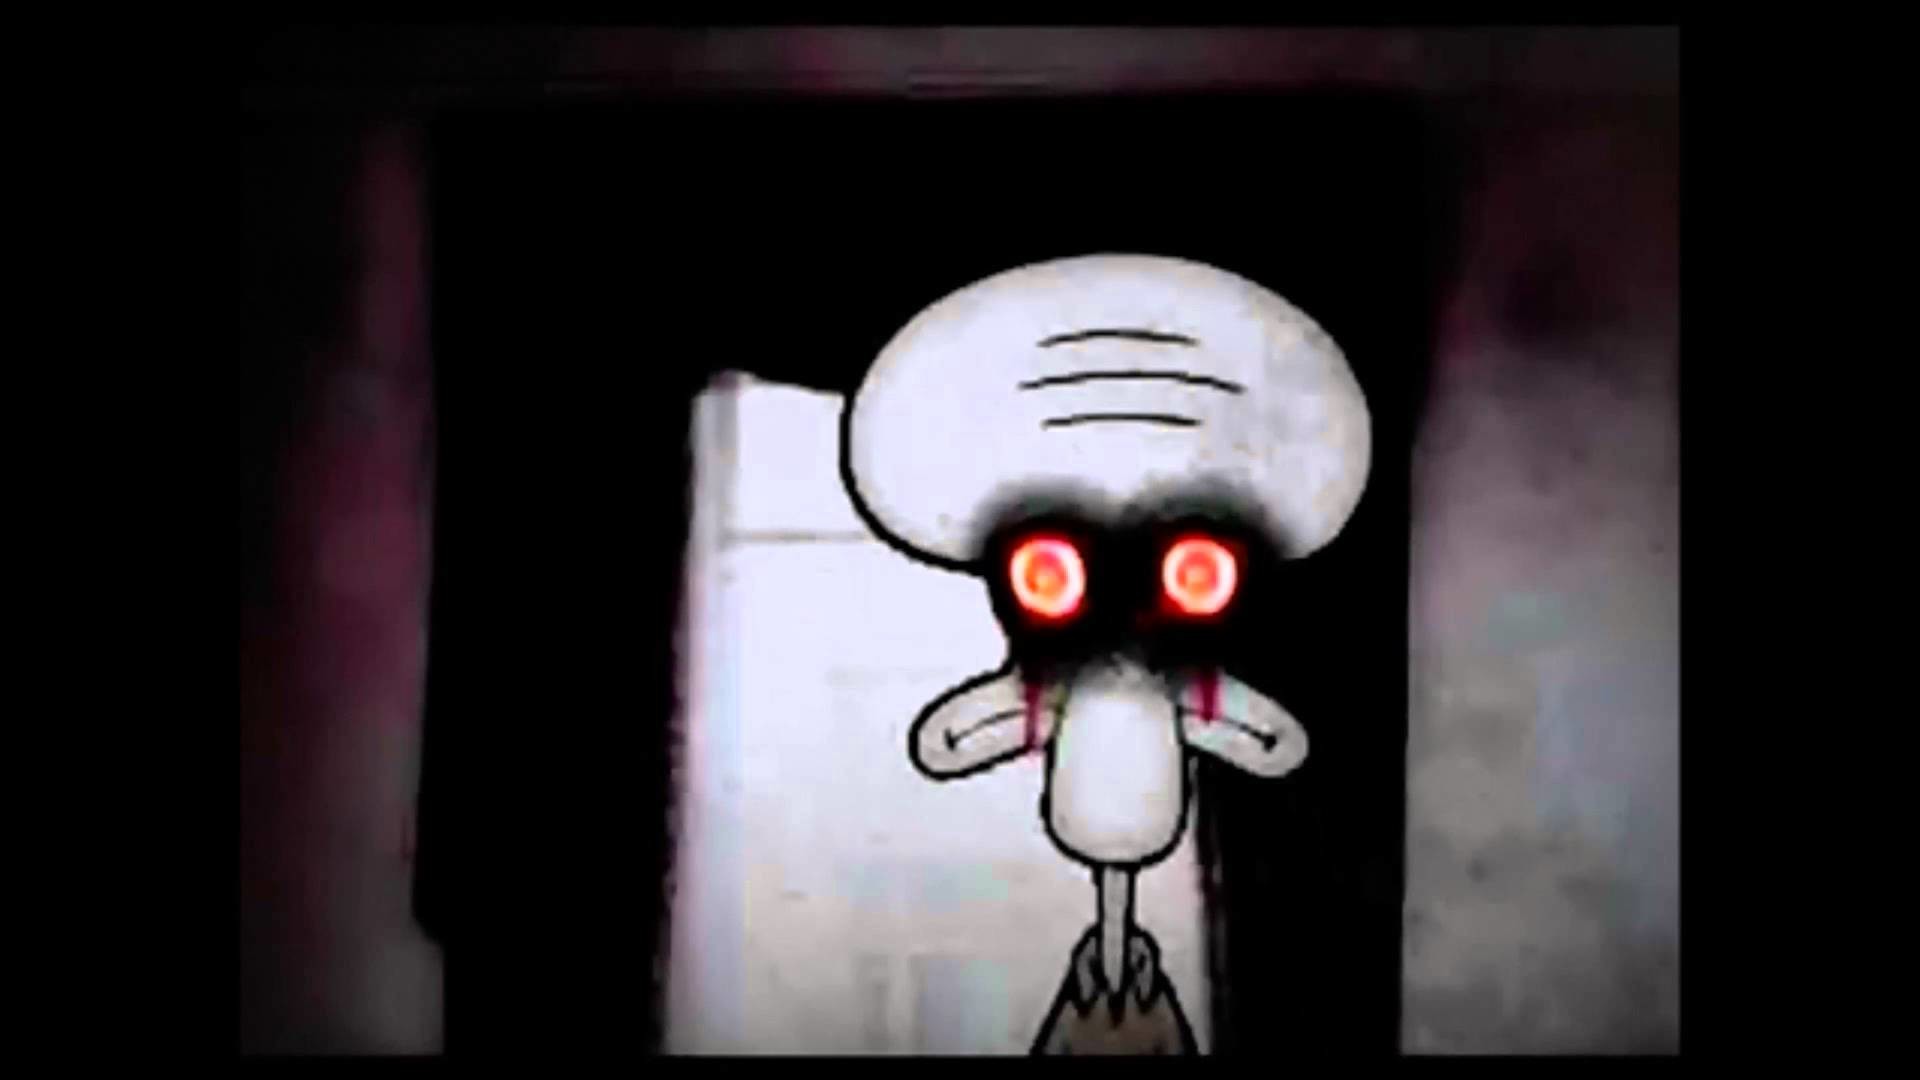 Squidward 039 S Suicide Slender Fortress Non Official Wikia Fandom Powered By Wikia 1920x1080